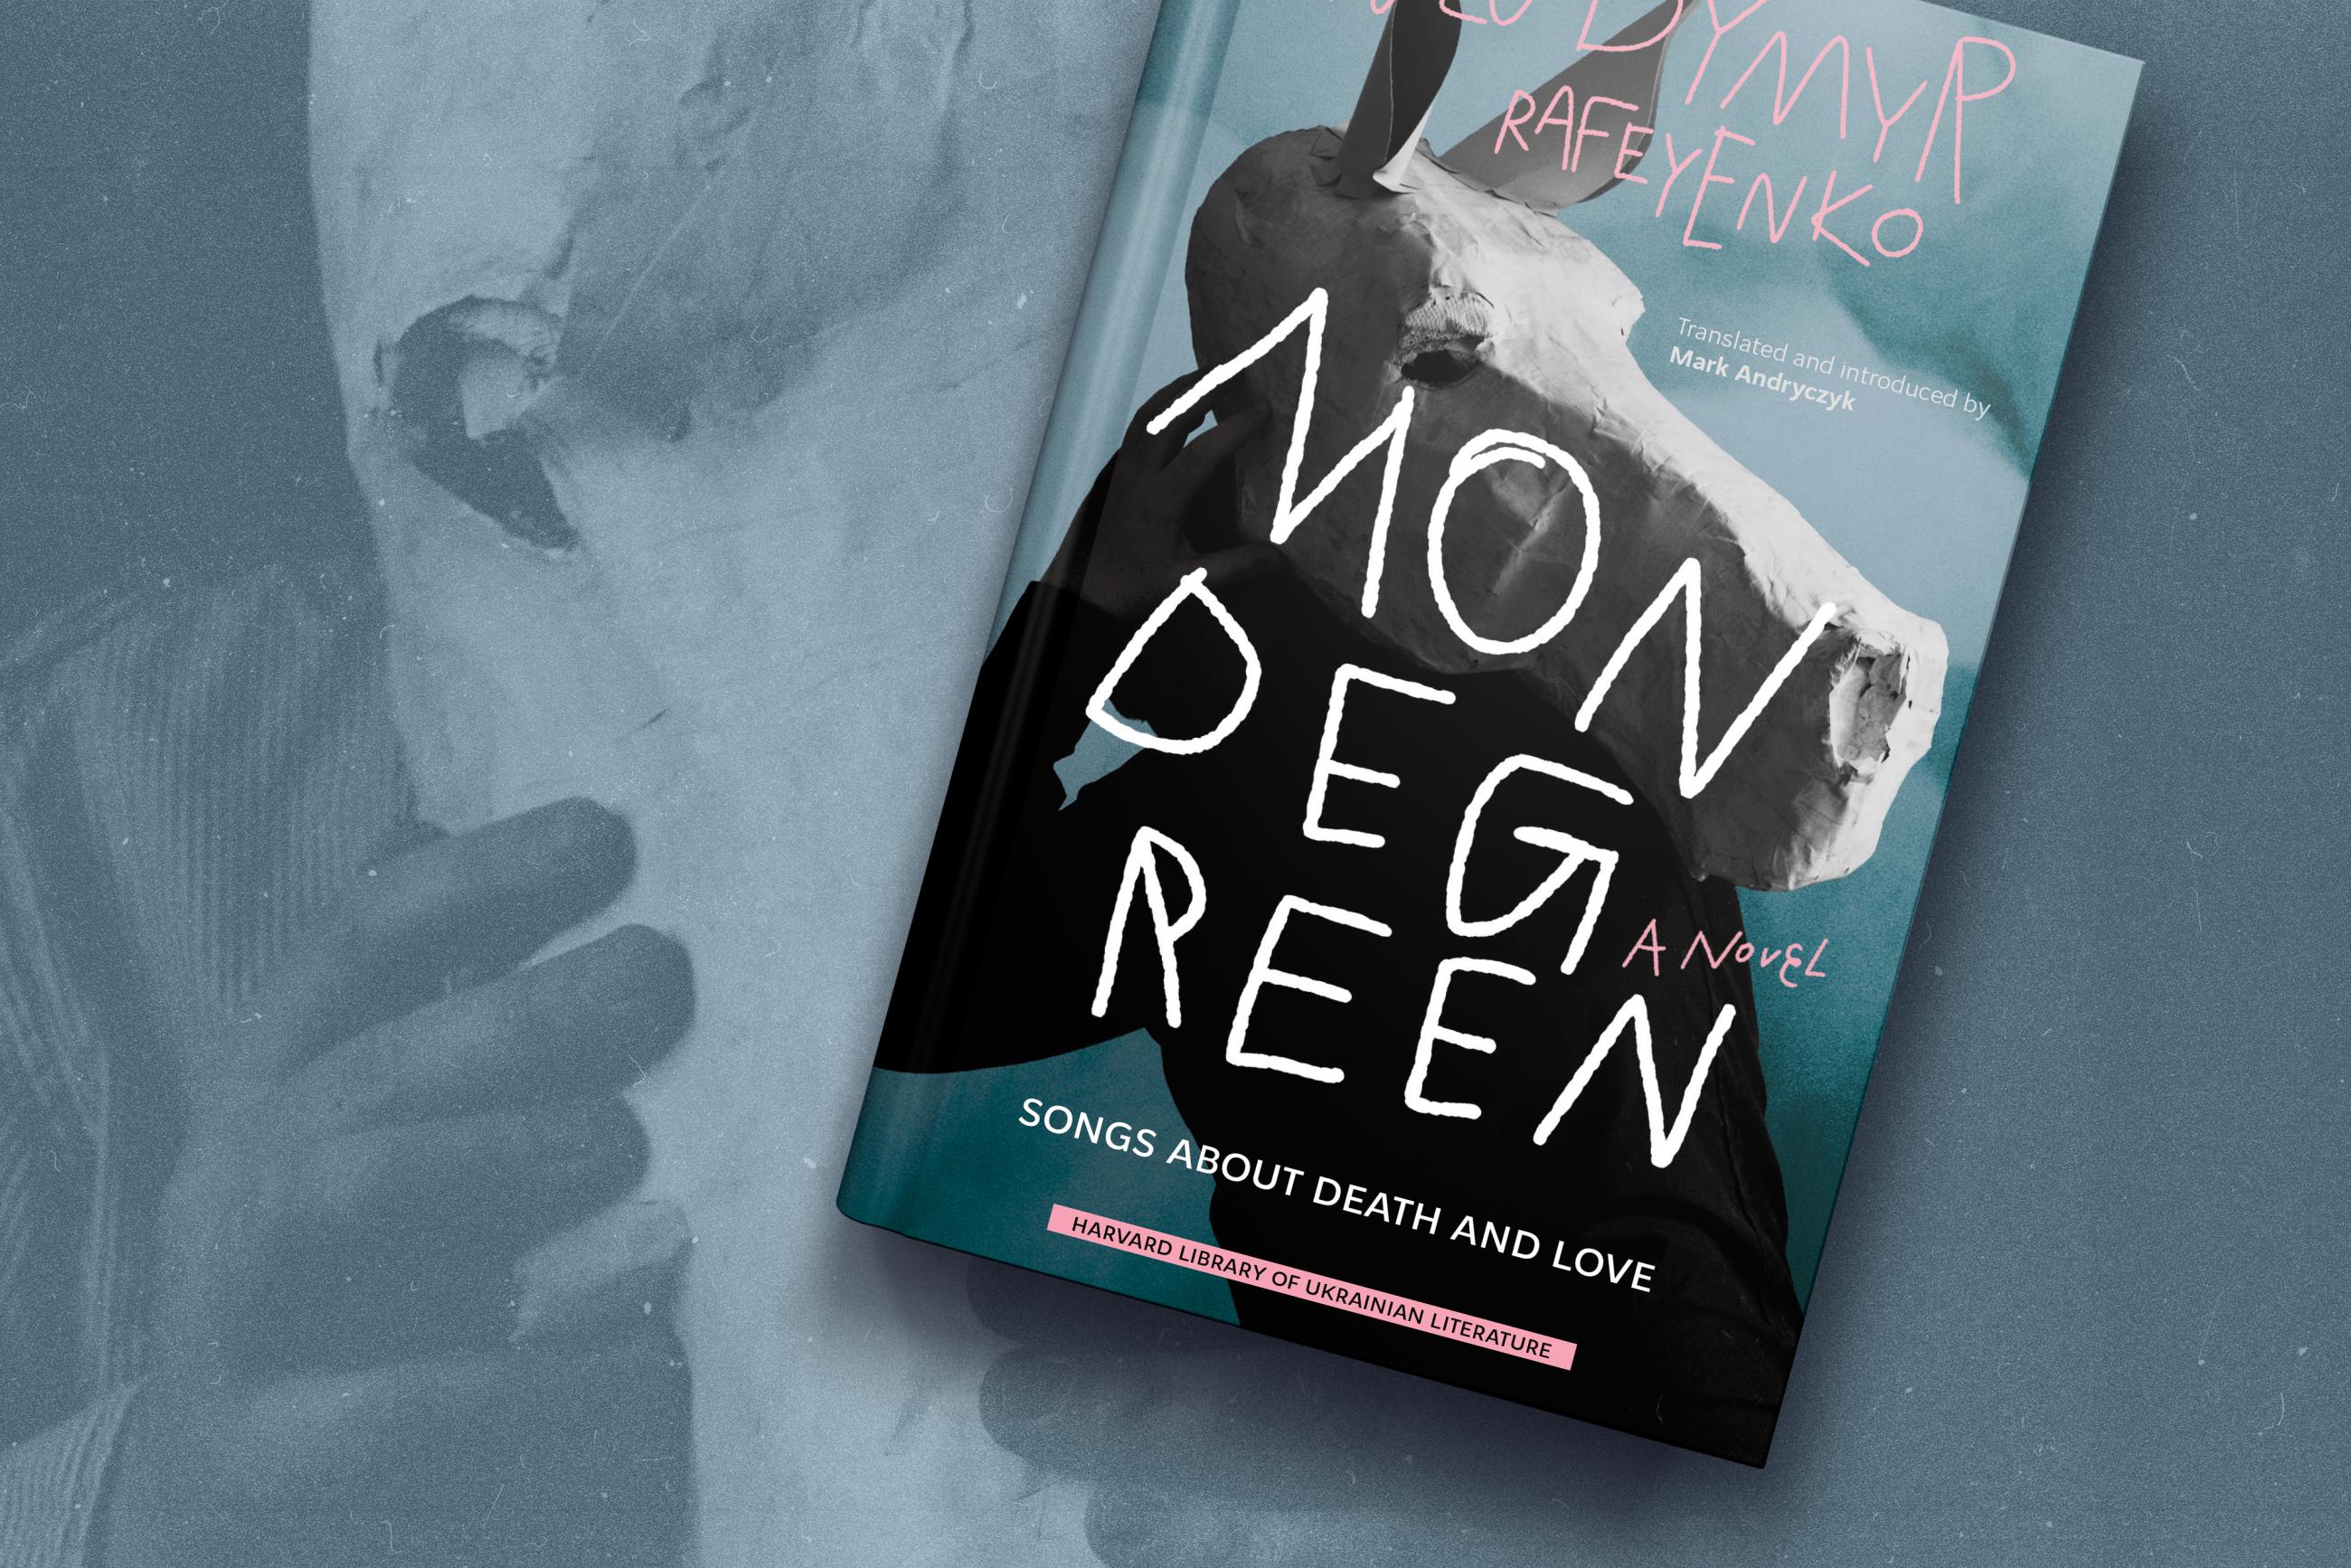 The cover of the book Mondegreen: Songs of Love and Death